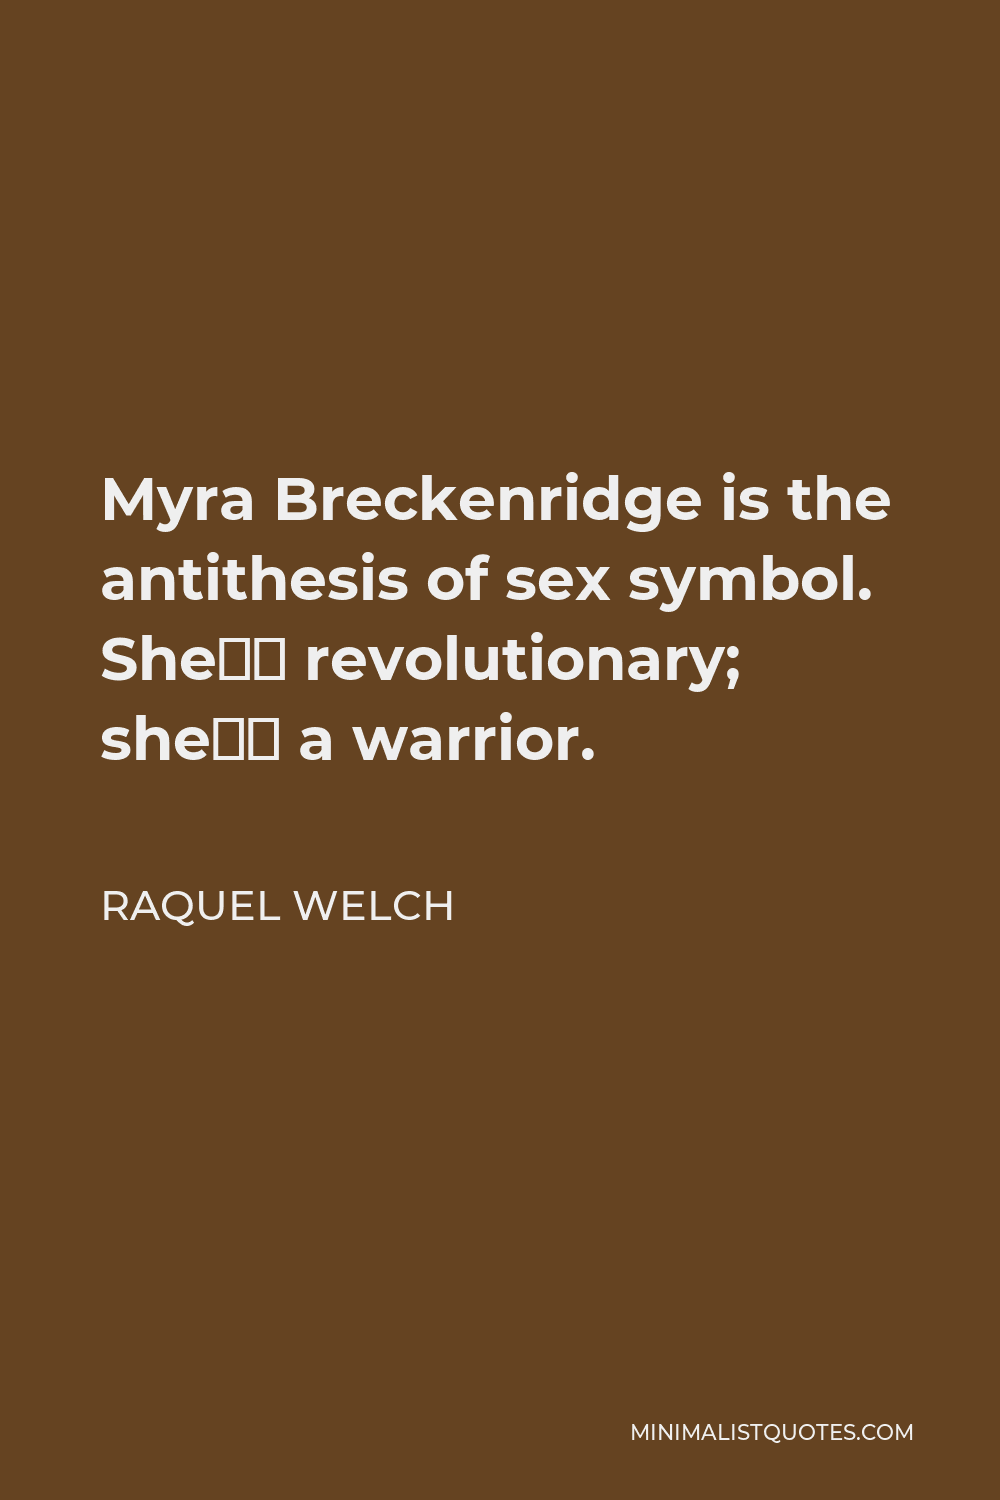 Raquel Welch Quote - Myra Breckenridge is the antithesis of sex symbol. She’s revolutionary; she’s a warrior.